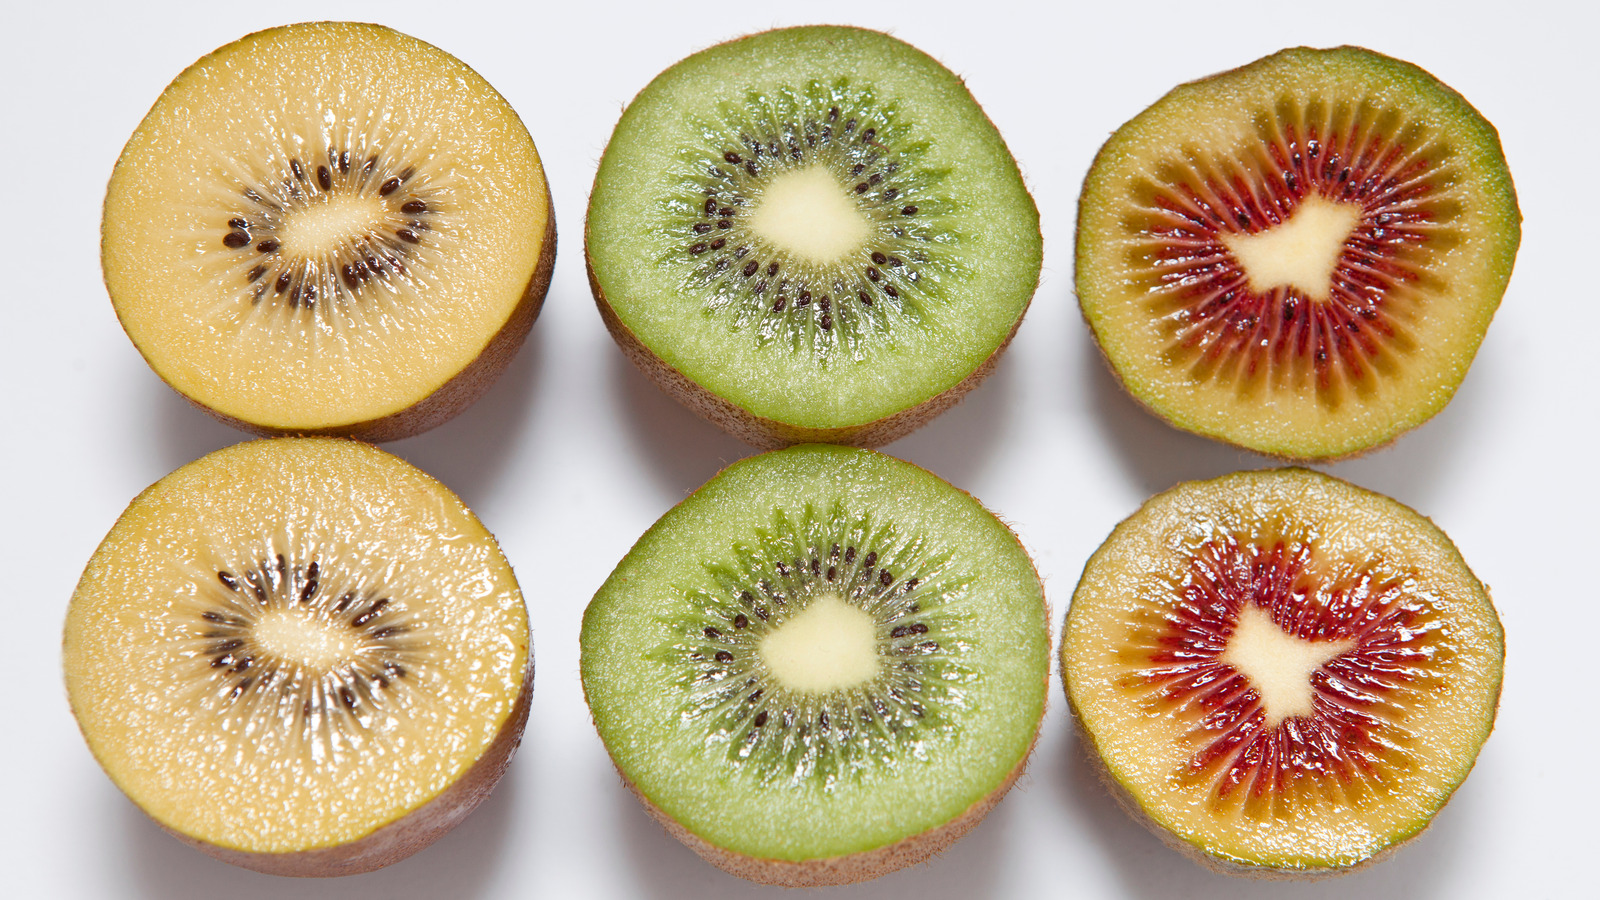 What Makes The Green Kiwifruit Different From The Golden Kiwifruit?